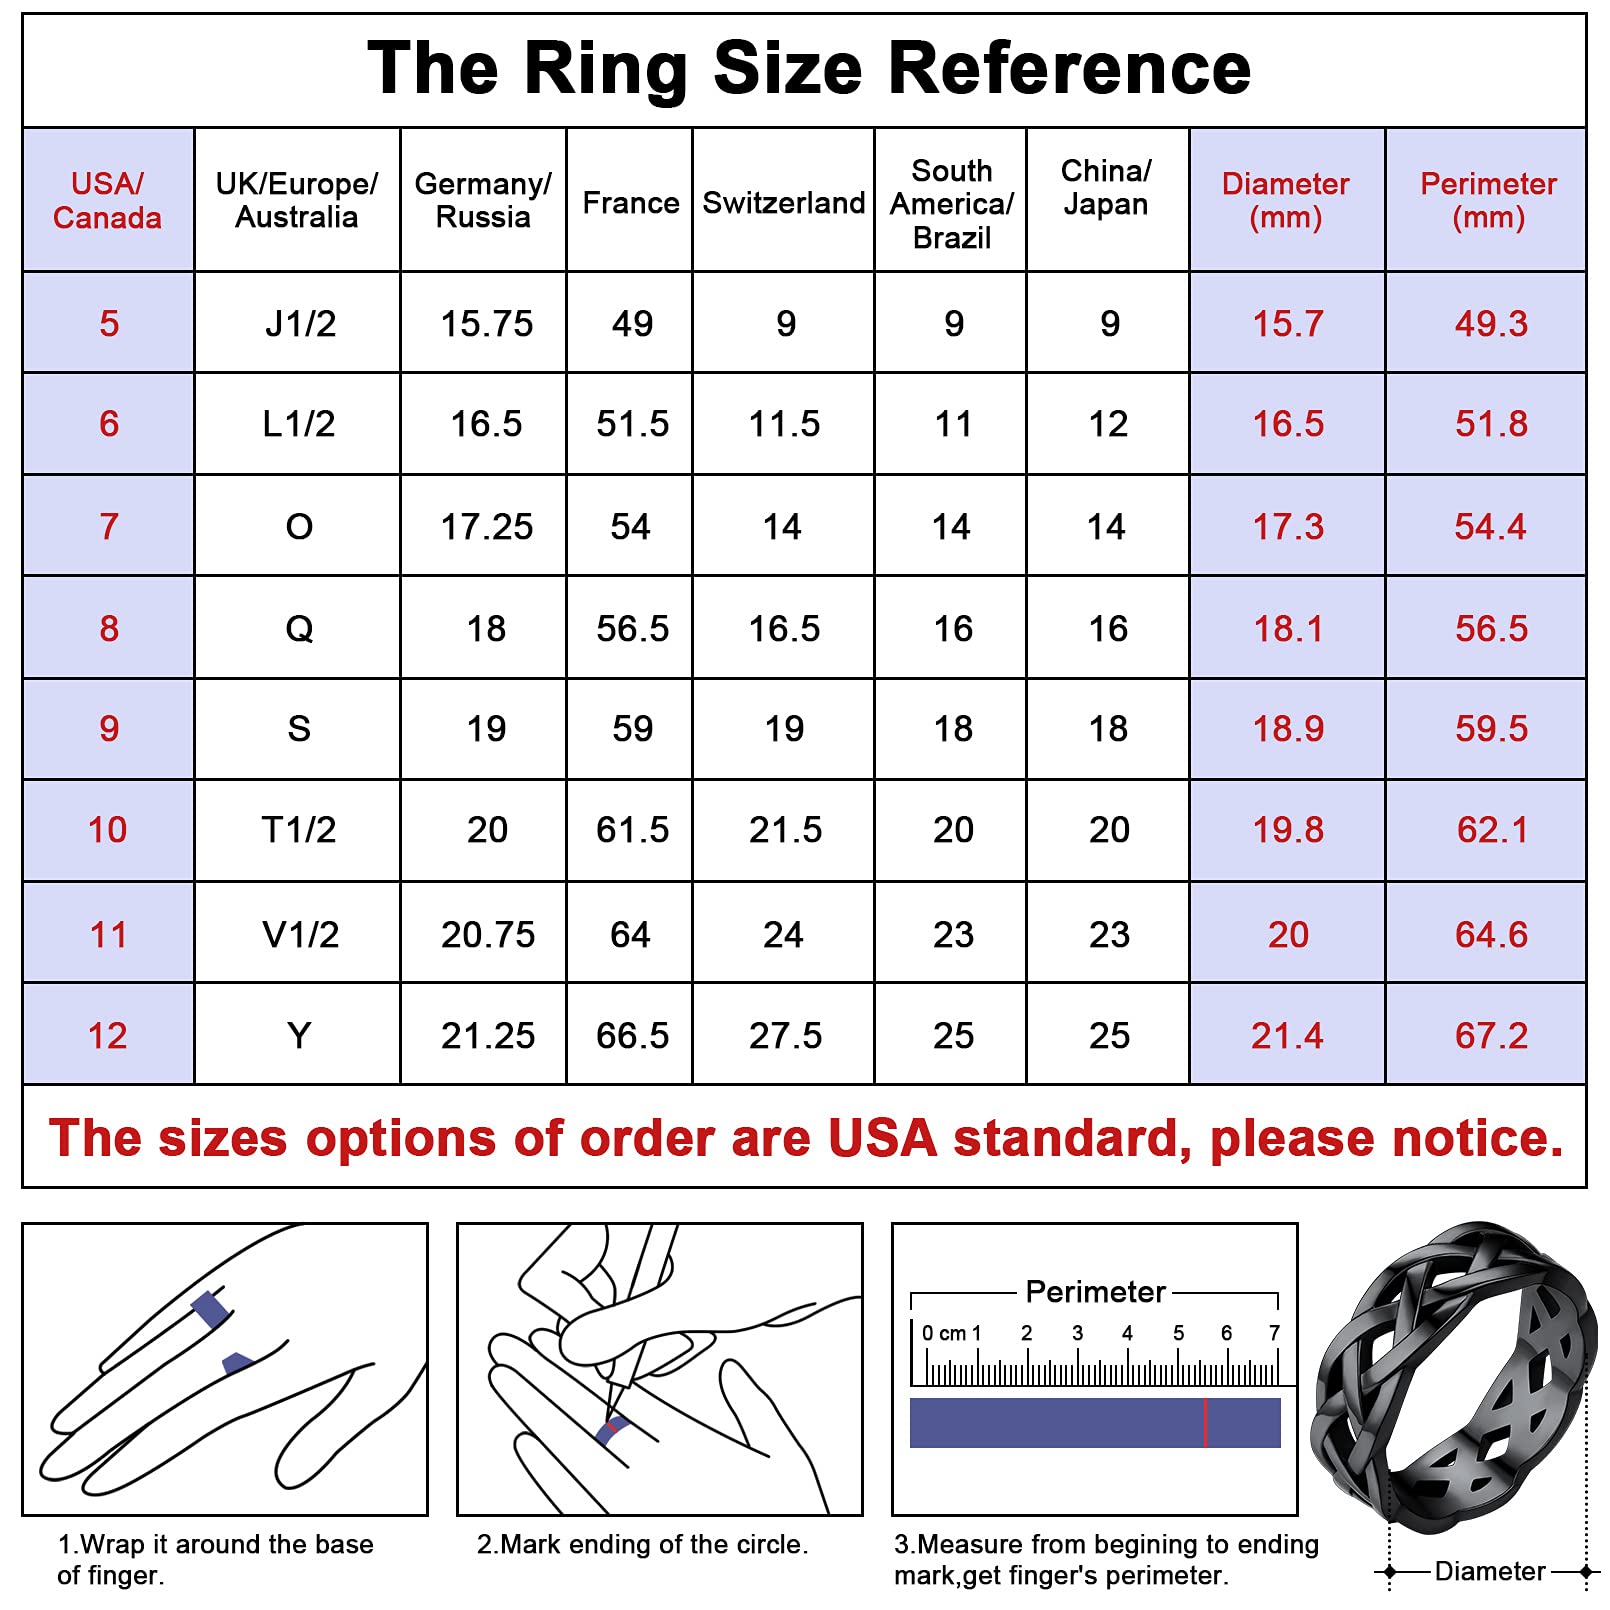 FaithHeart Celtic Knot Band Rings for Men Women, Stainless Steel/18K Gold Plated Viking Wedding Bands with Delicate Gift Packaging